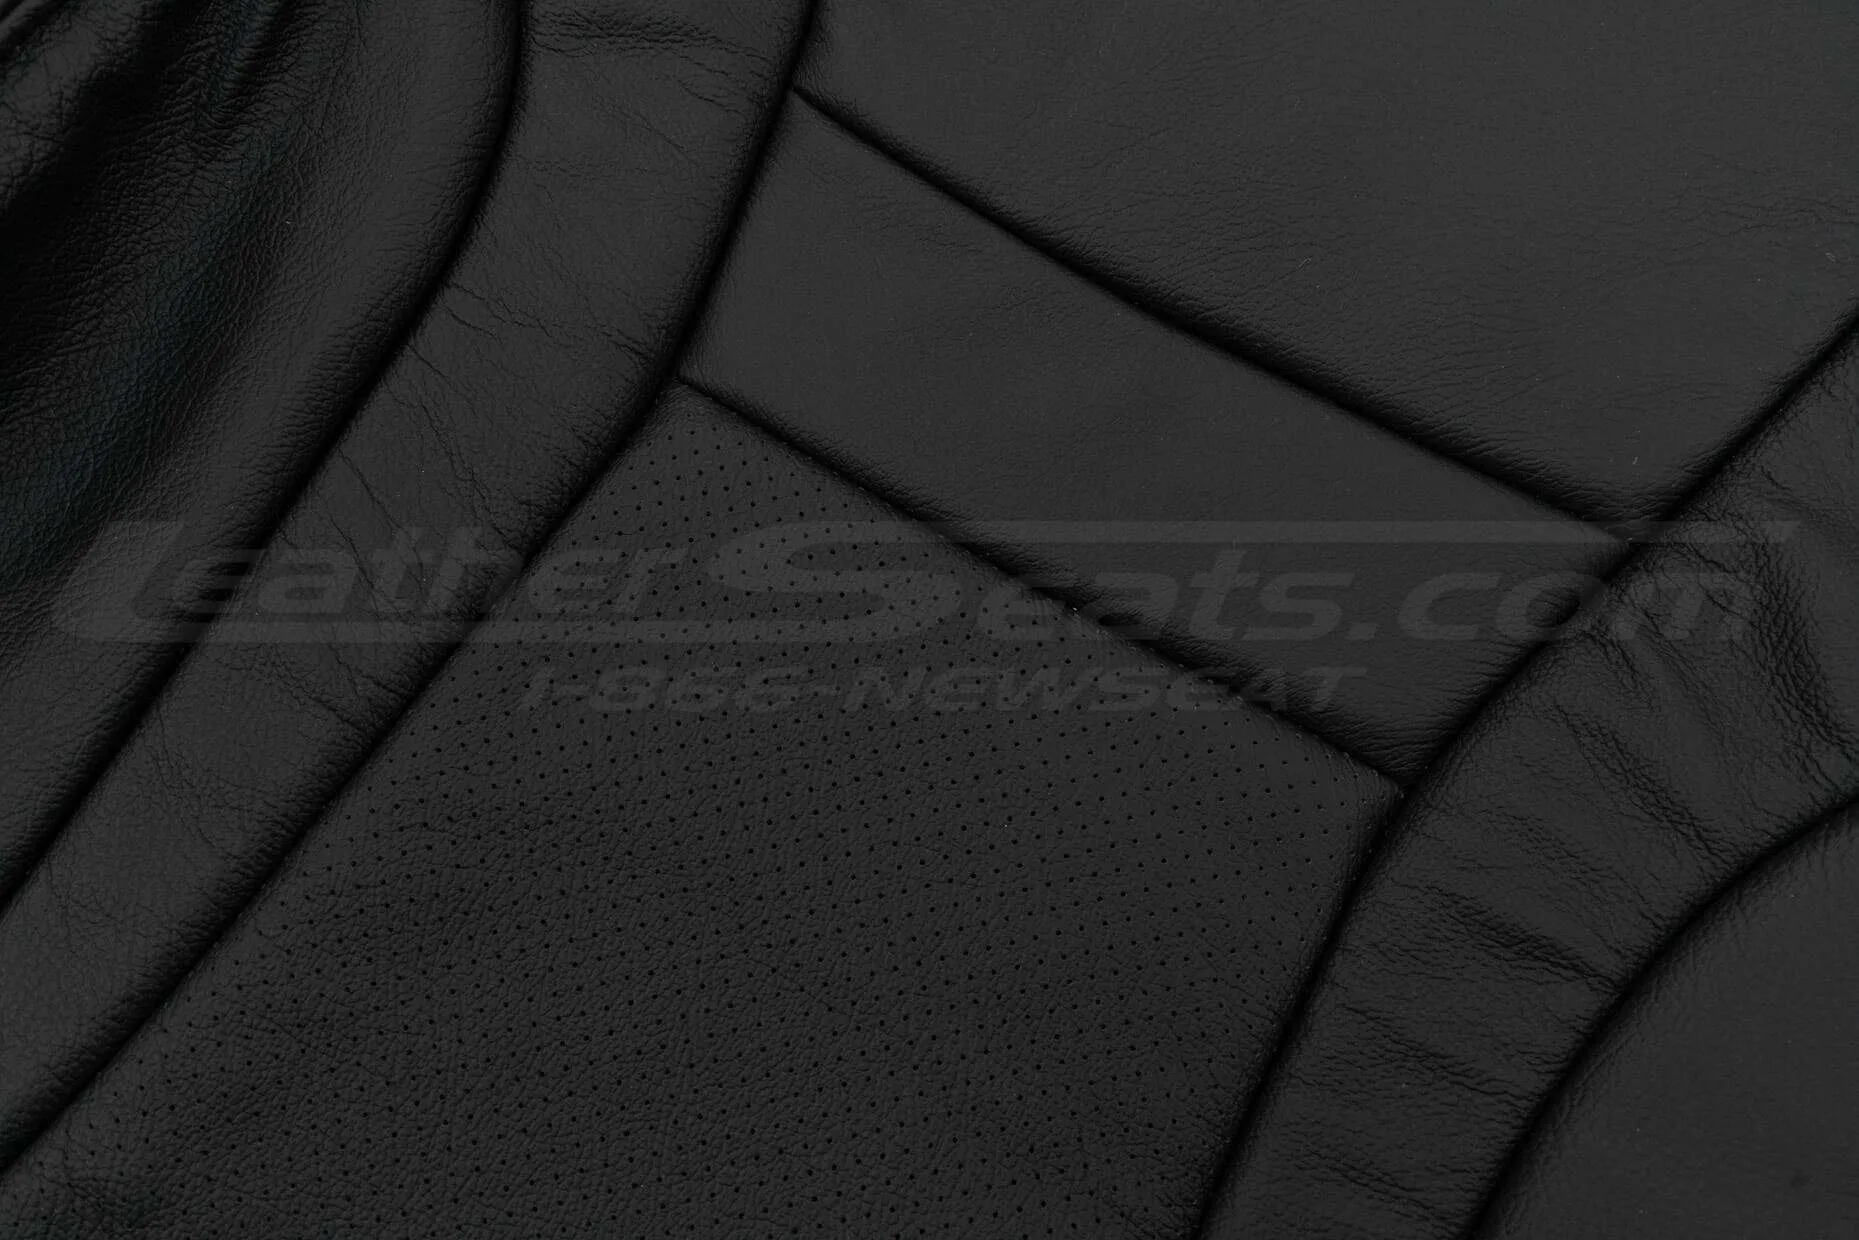 Perforated insert and leather texture close-up on backrest upholstery